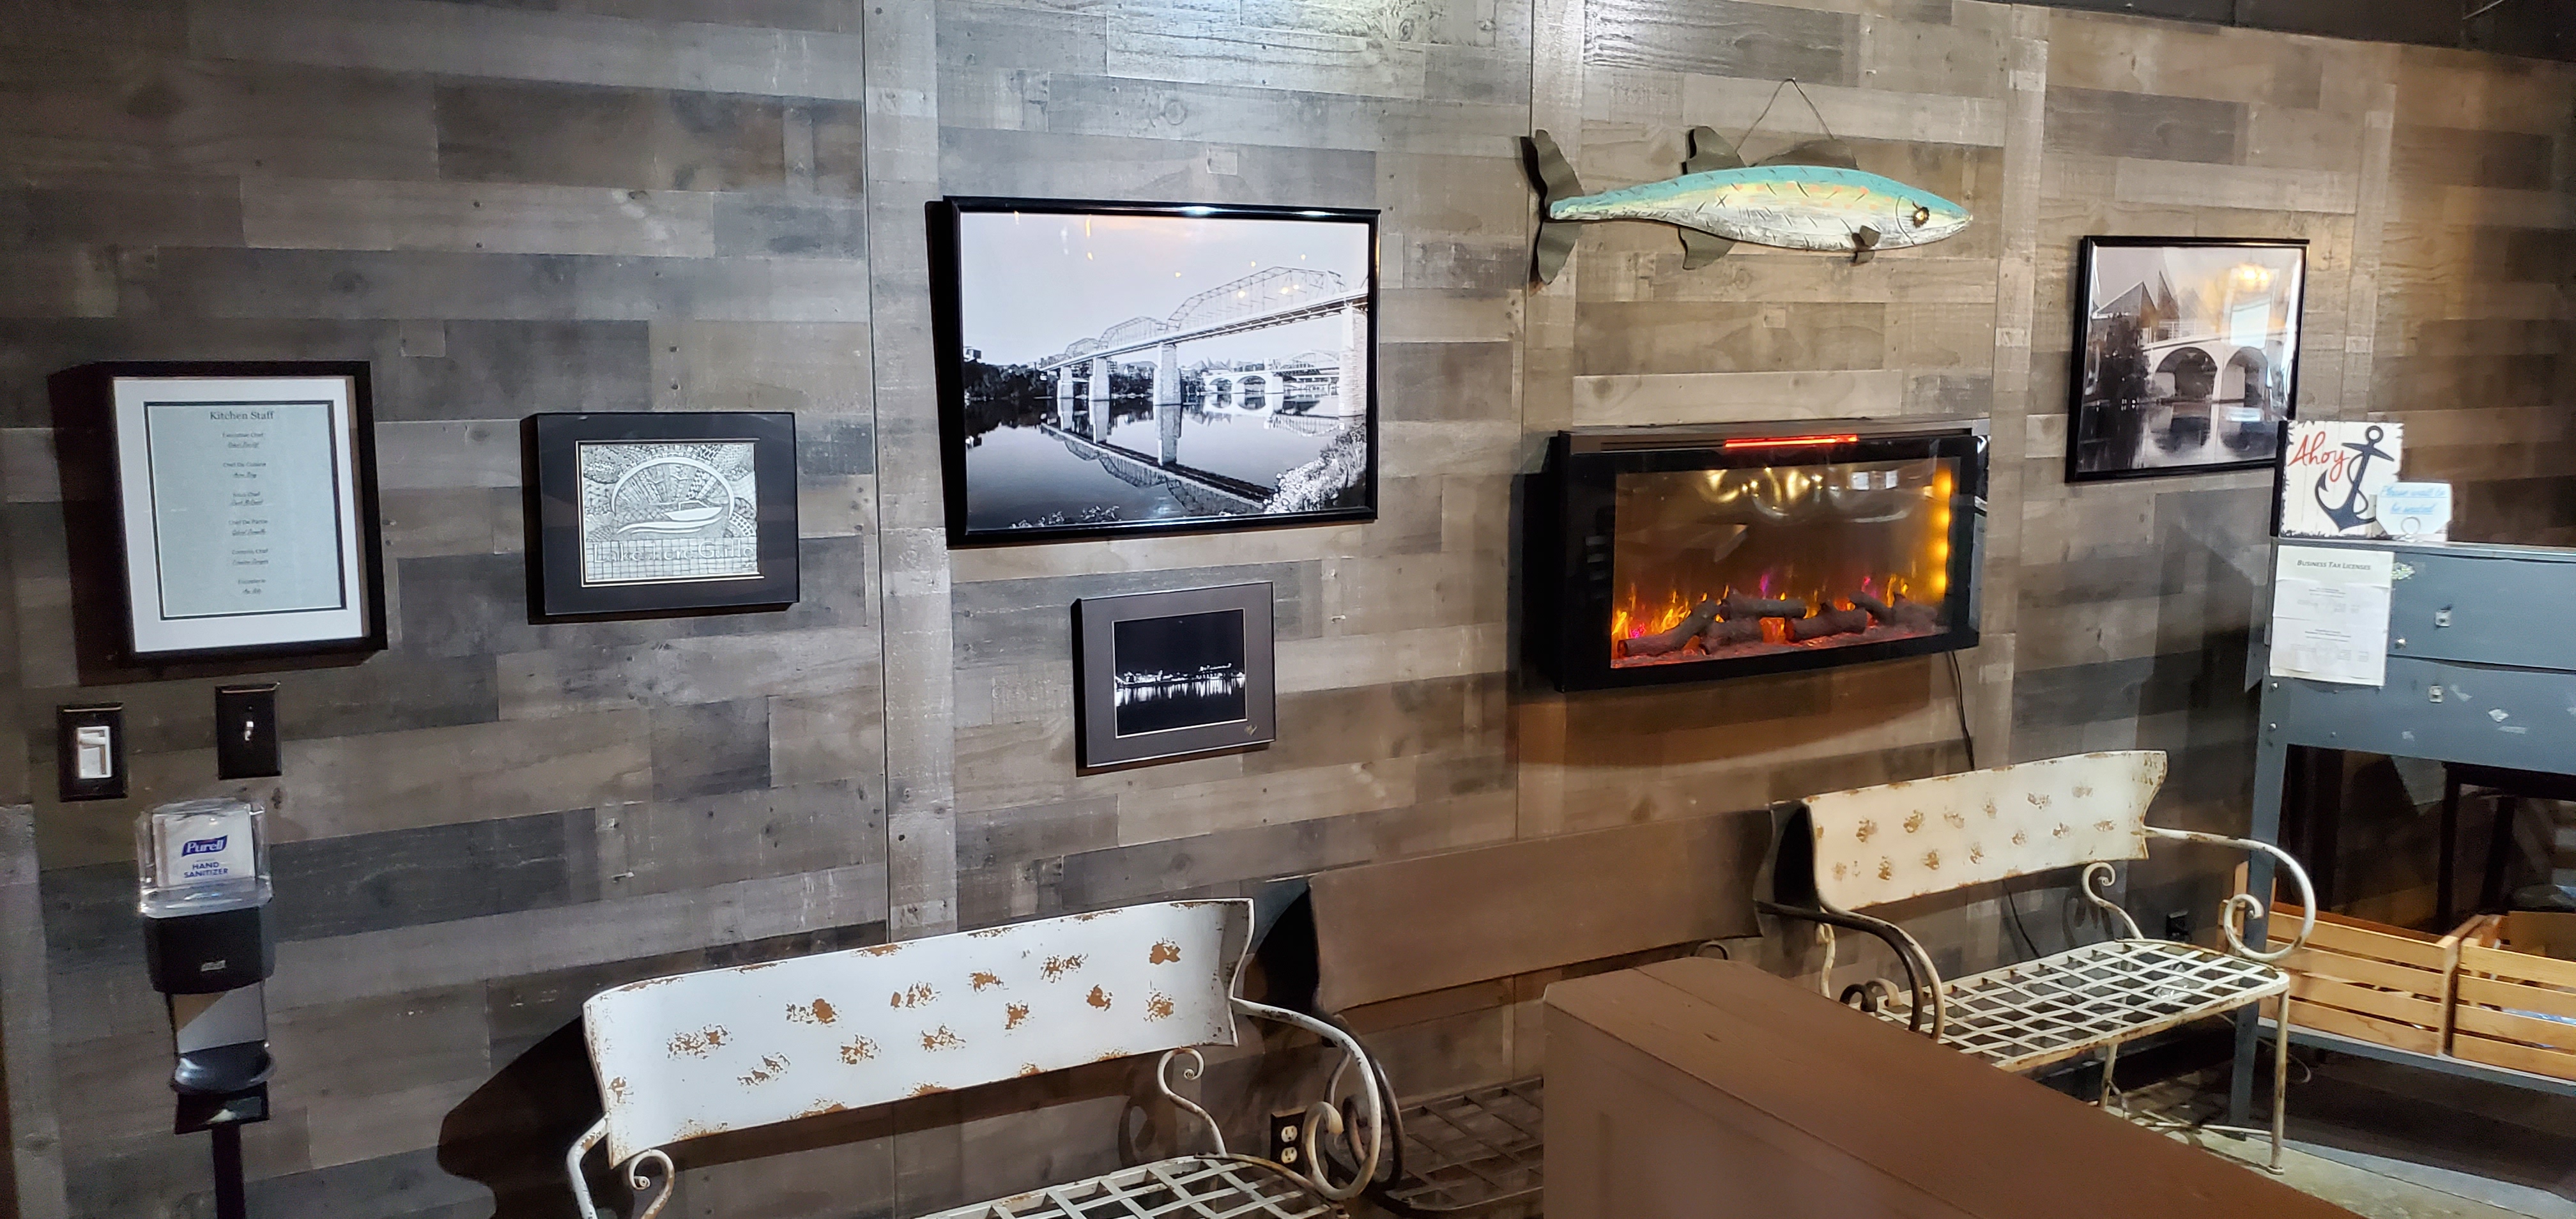 Wall with photos, a fish, and an e-fireplace